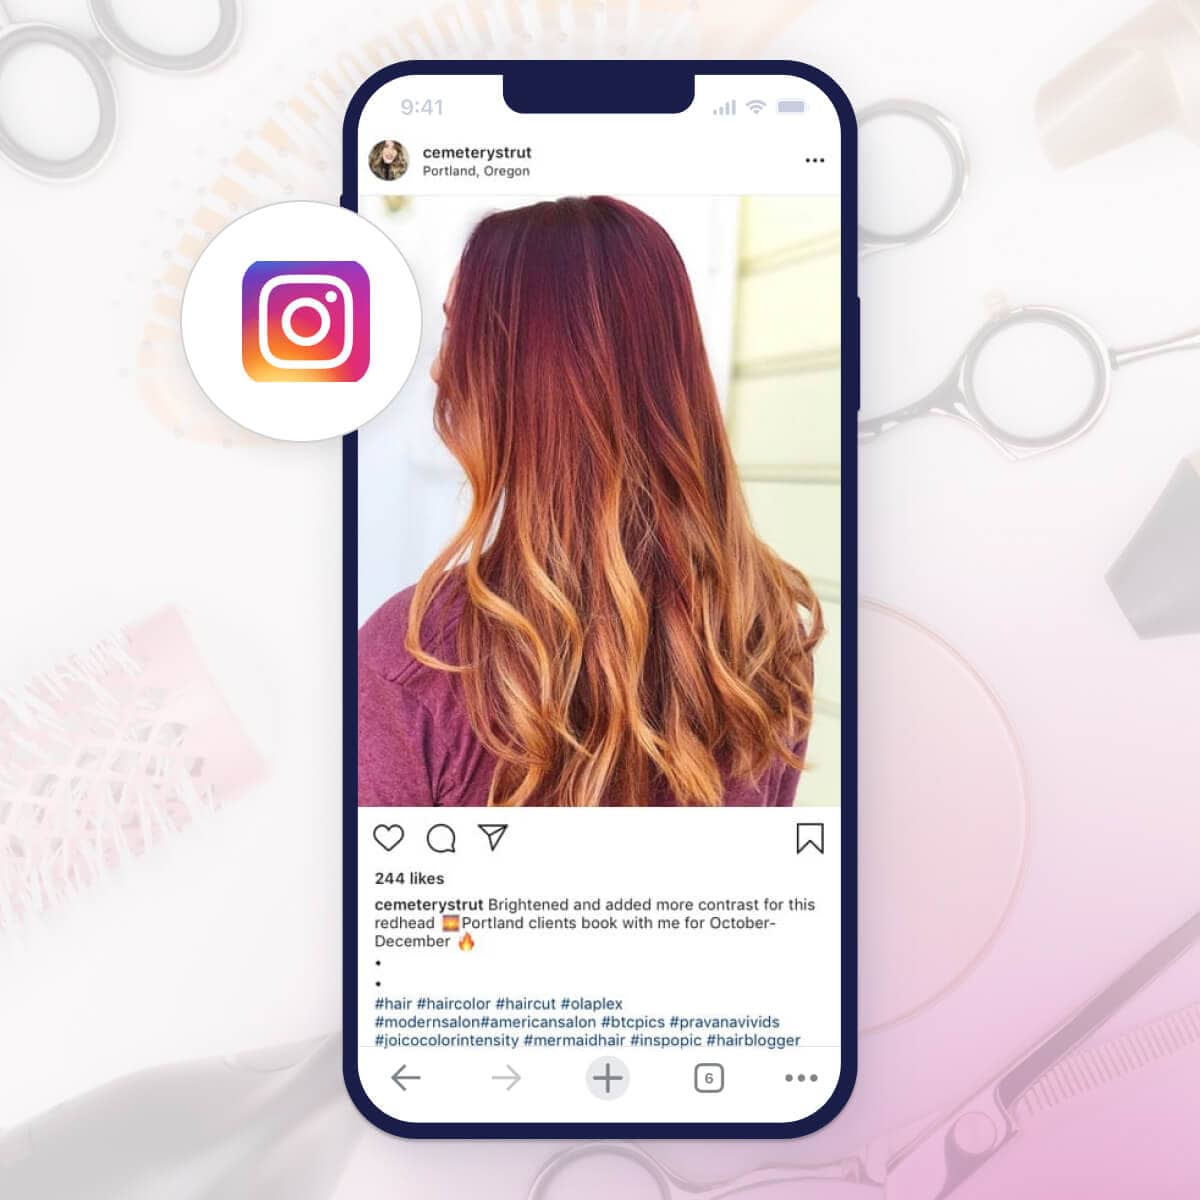 example of an Instagram caption for a salon